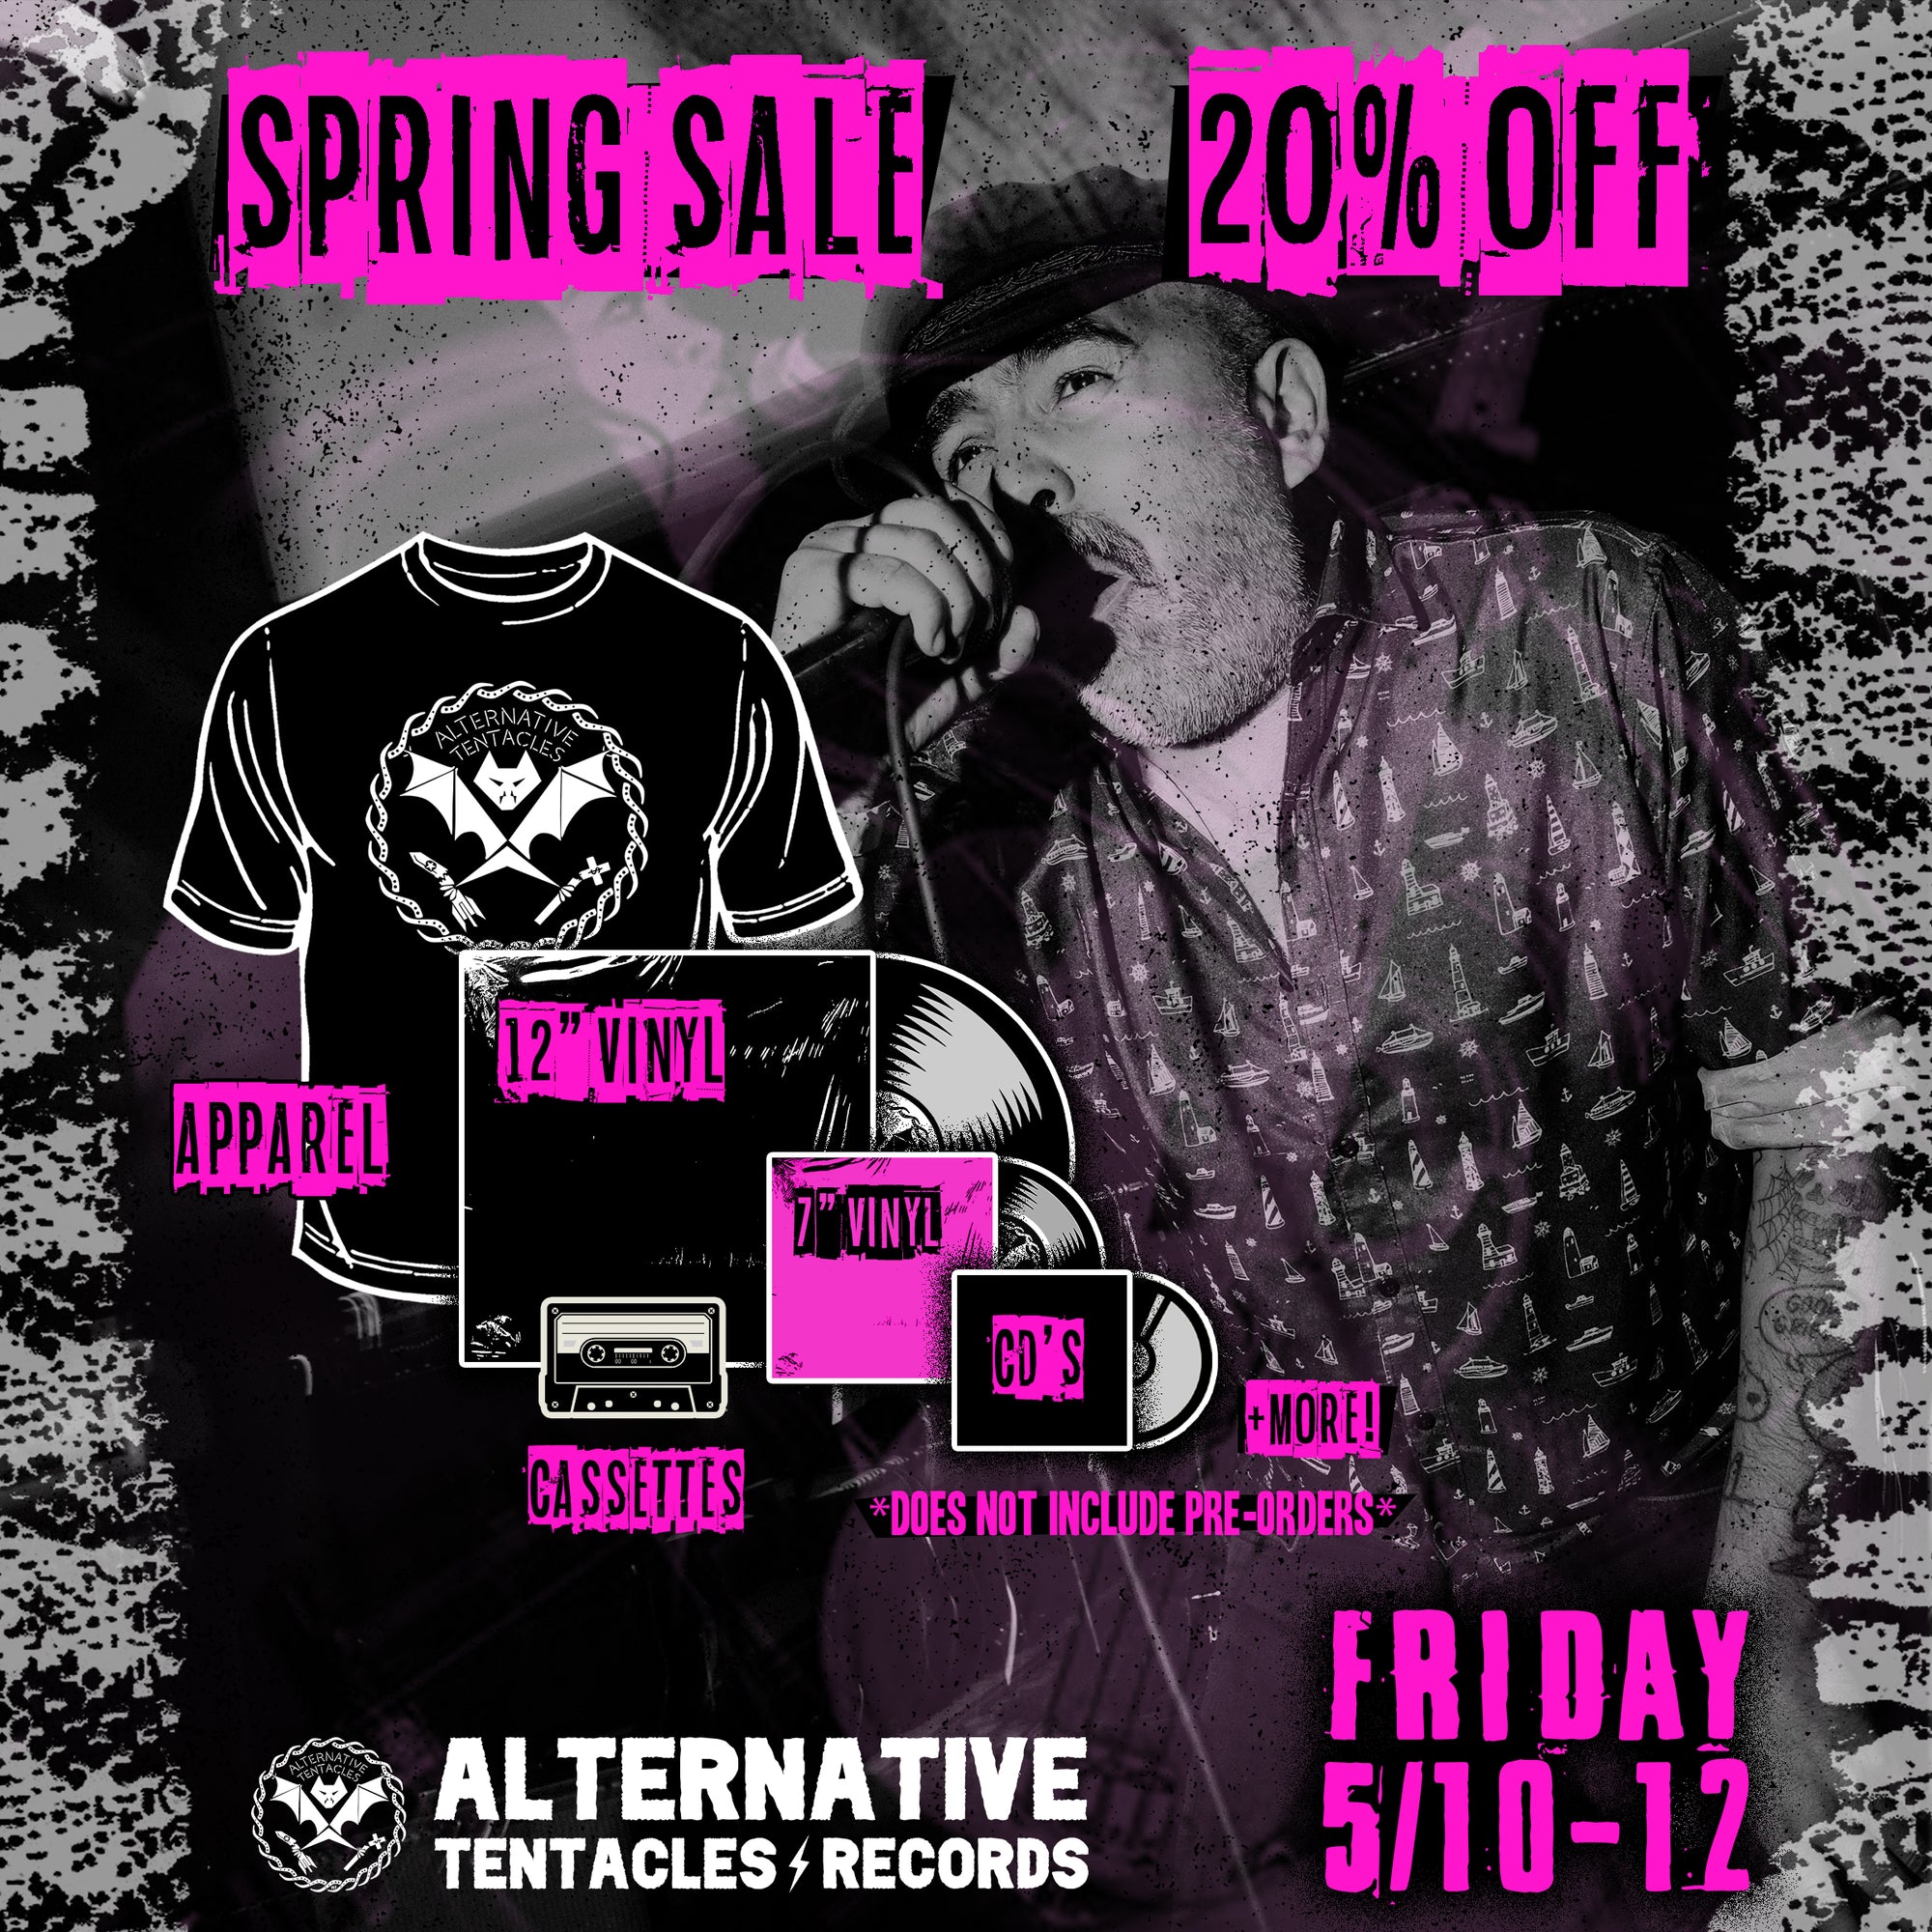 THIS WEEKEND: THE RETURN OF THE SPRING SALE!